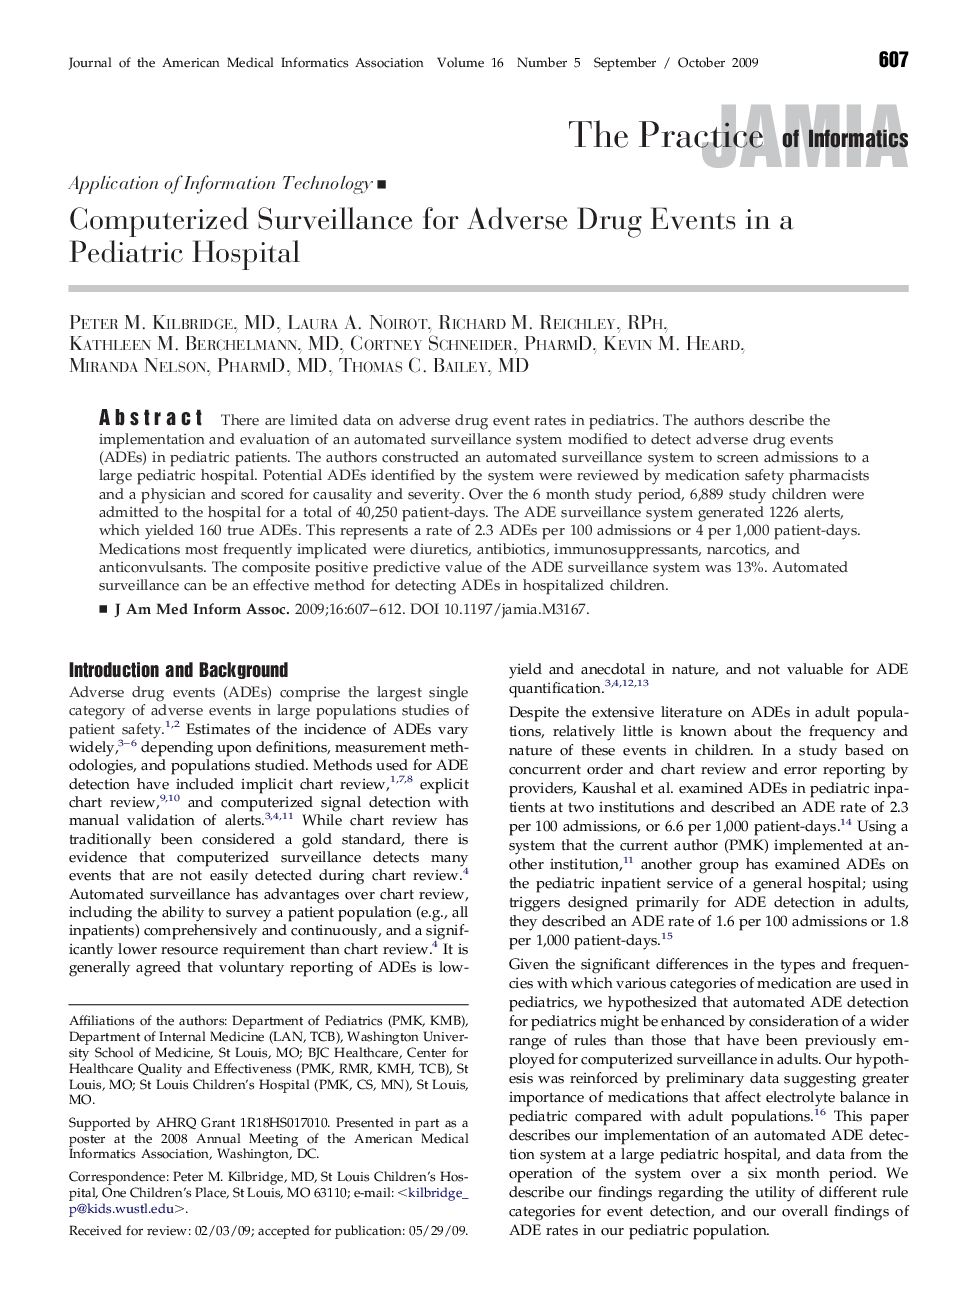 Computerized Surveillance for Adverse Drug Events in a Pediatric Hospital